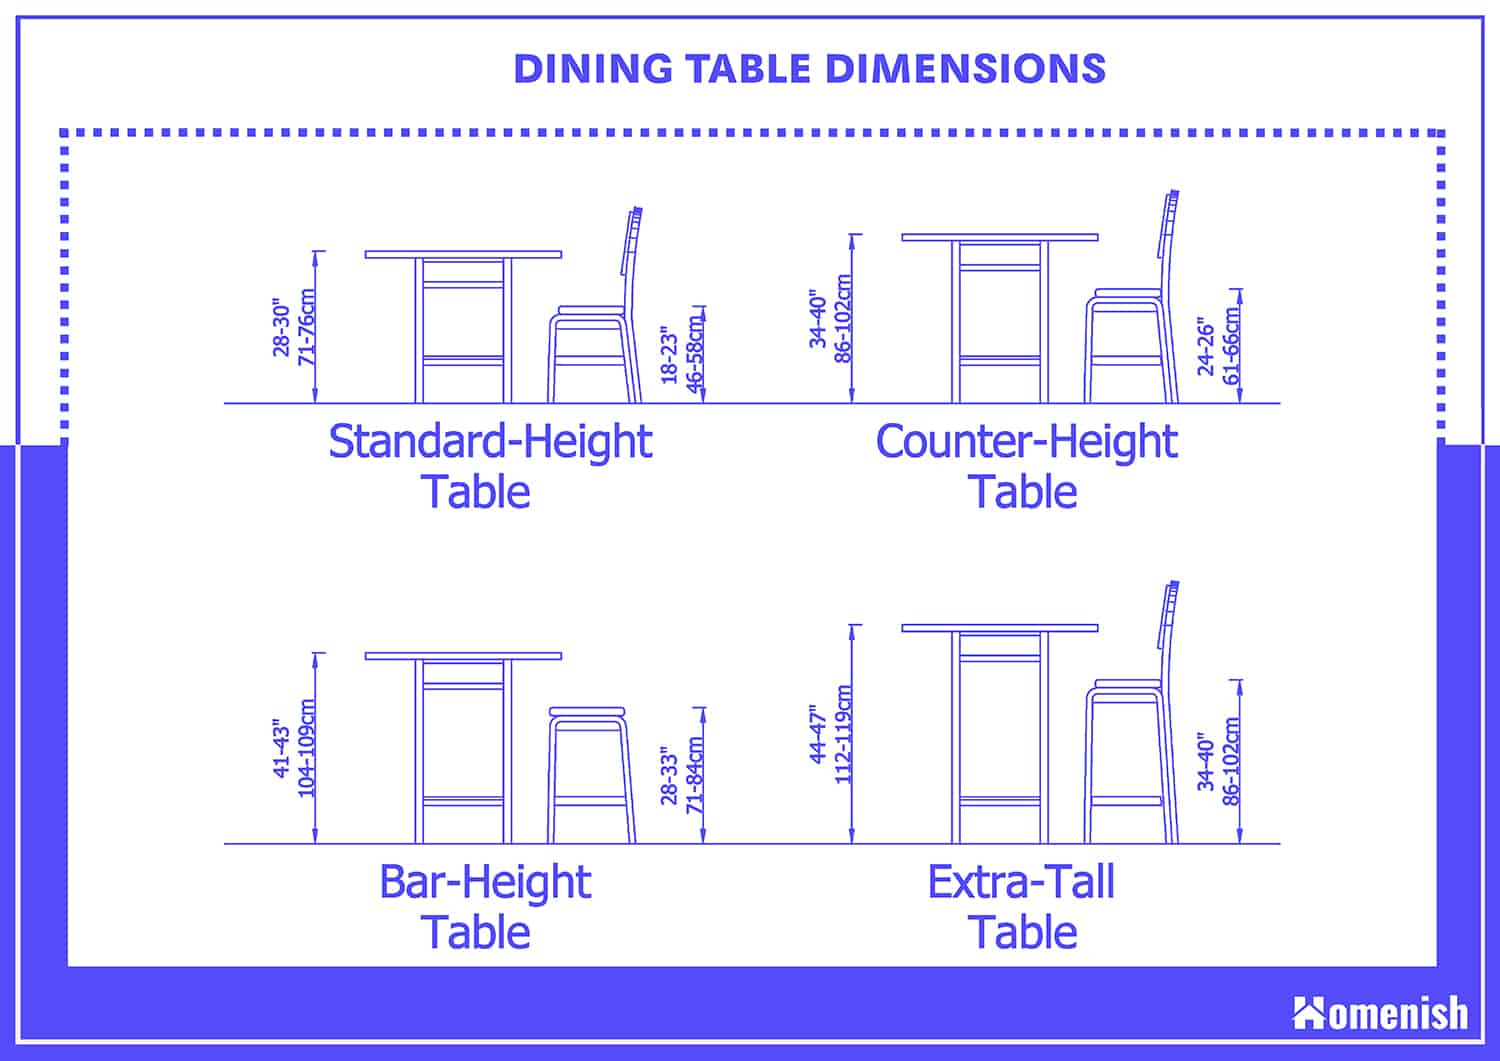 Standard Dining Table Dimensions, What Is The Standard Size Of A Dining Room